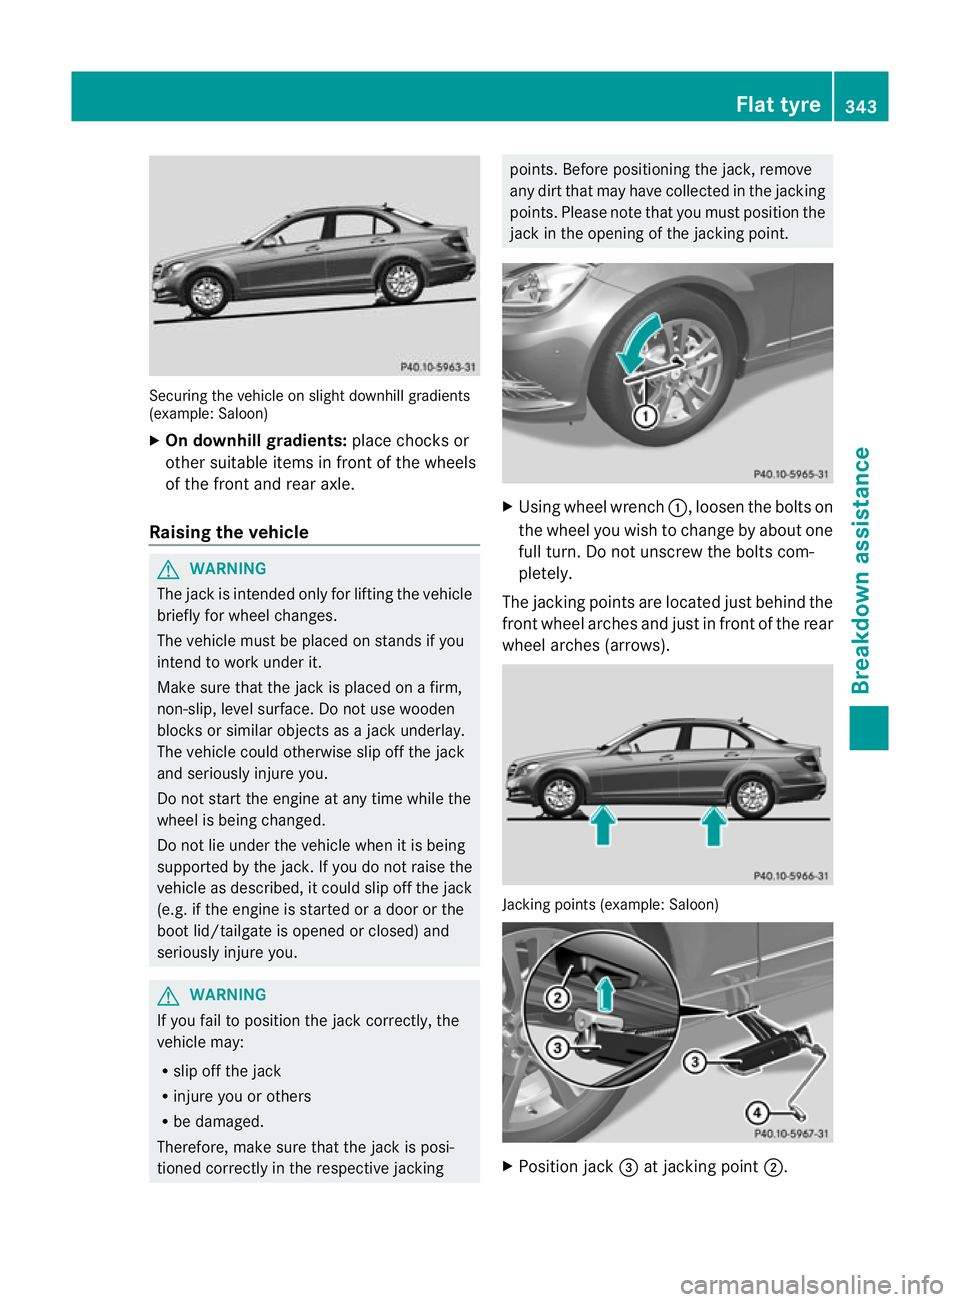 MERCEDES-BENZ C-CLASS SALOON 2011  Owners Manual Securing the vehicle on slight downhill gradients
(example: Saloon)
X
On downhill gradients: place chocks or
othe rsuitable items in fron tofthe wheels
of the front and rear axle.
Raising the vehicle 